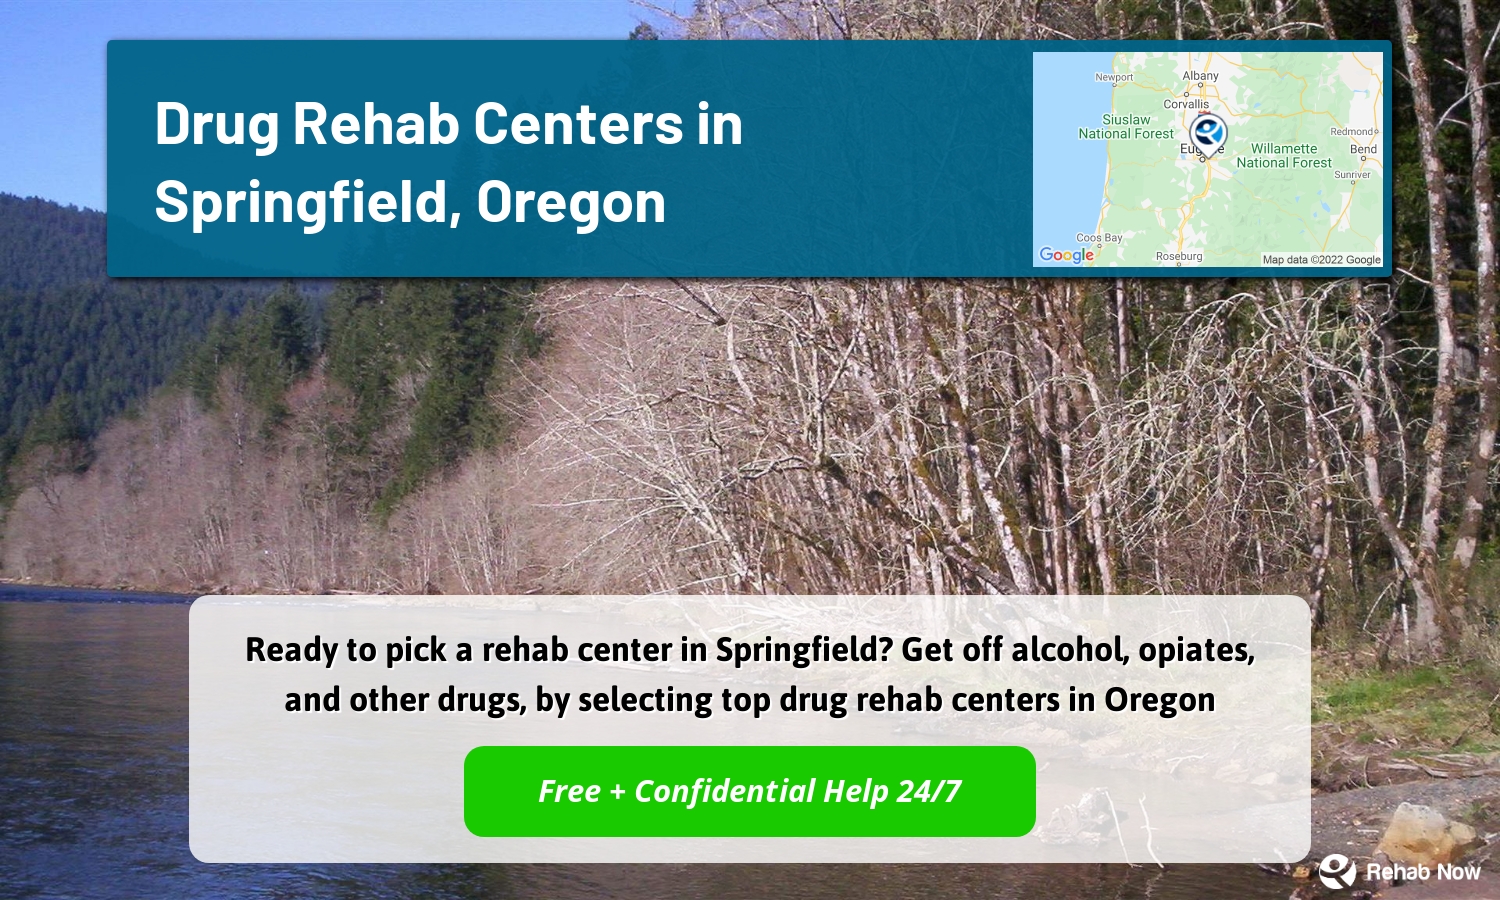 Ready to pick a rehab center in Springfield? Get off alcohol, opiates, and other drugs, by selecting top drug rehab centers in Oregon